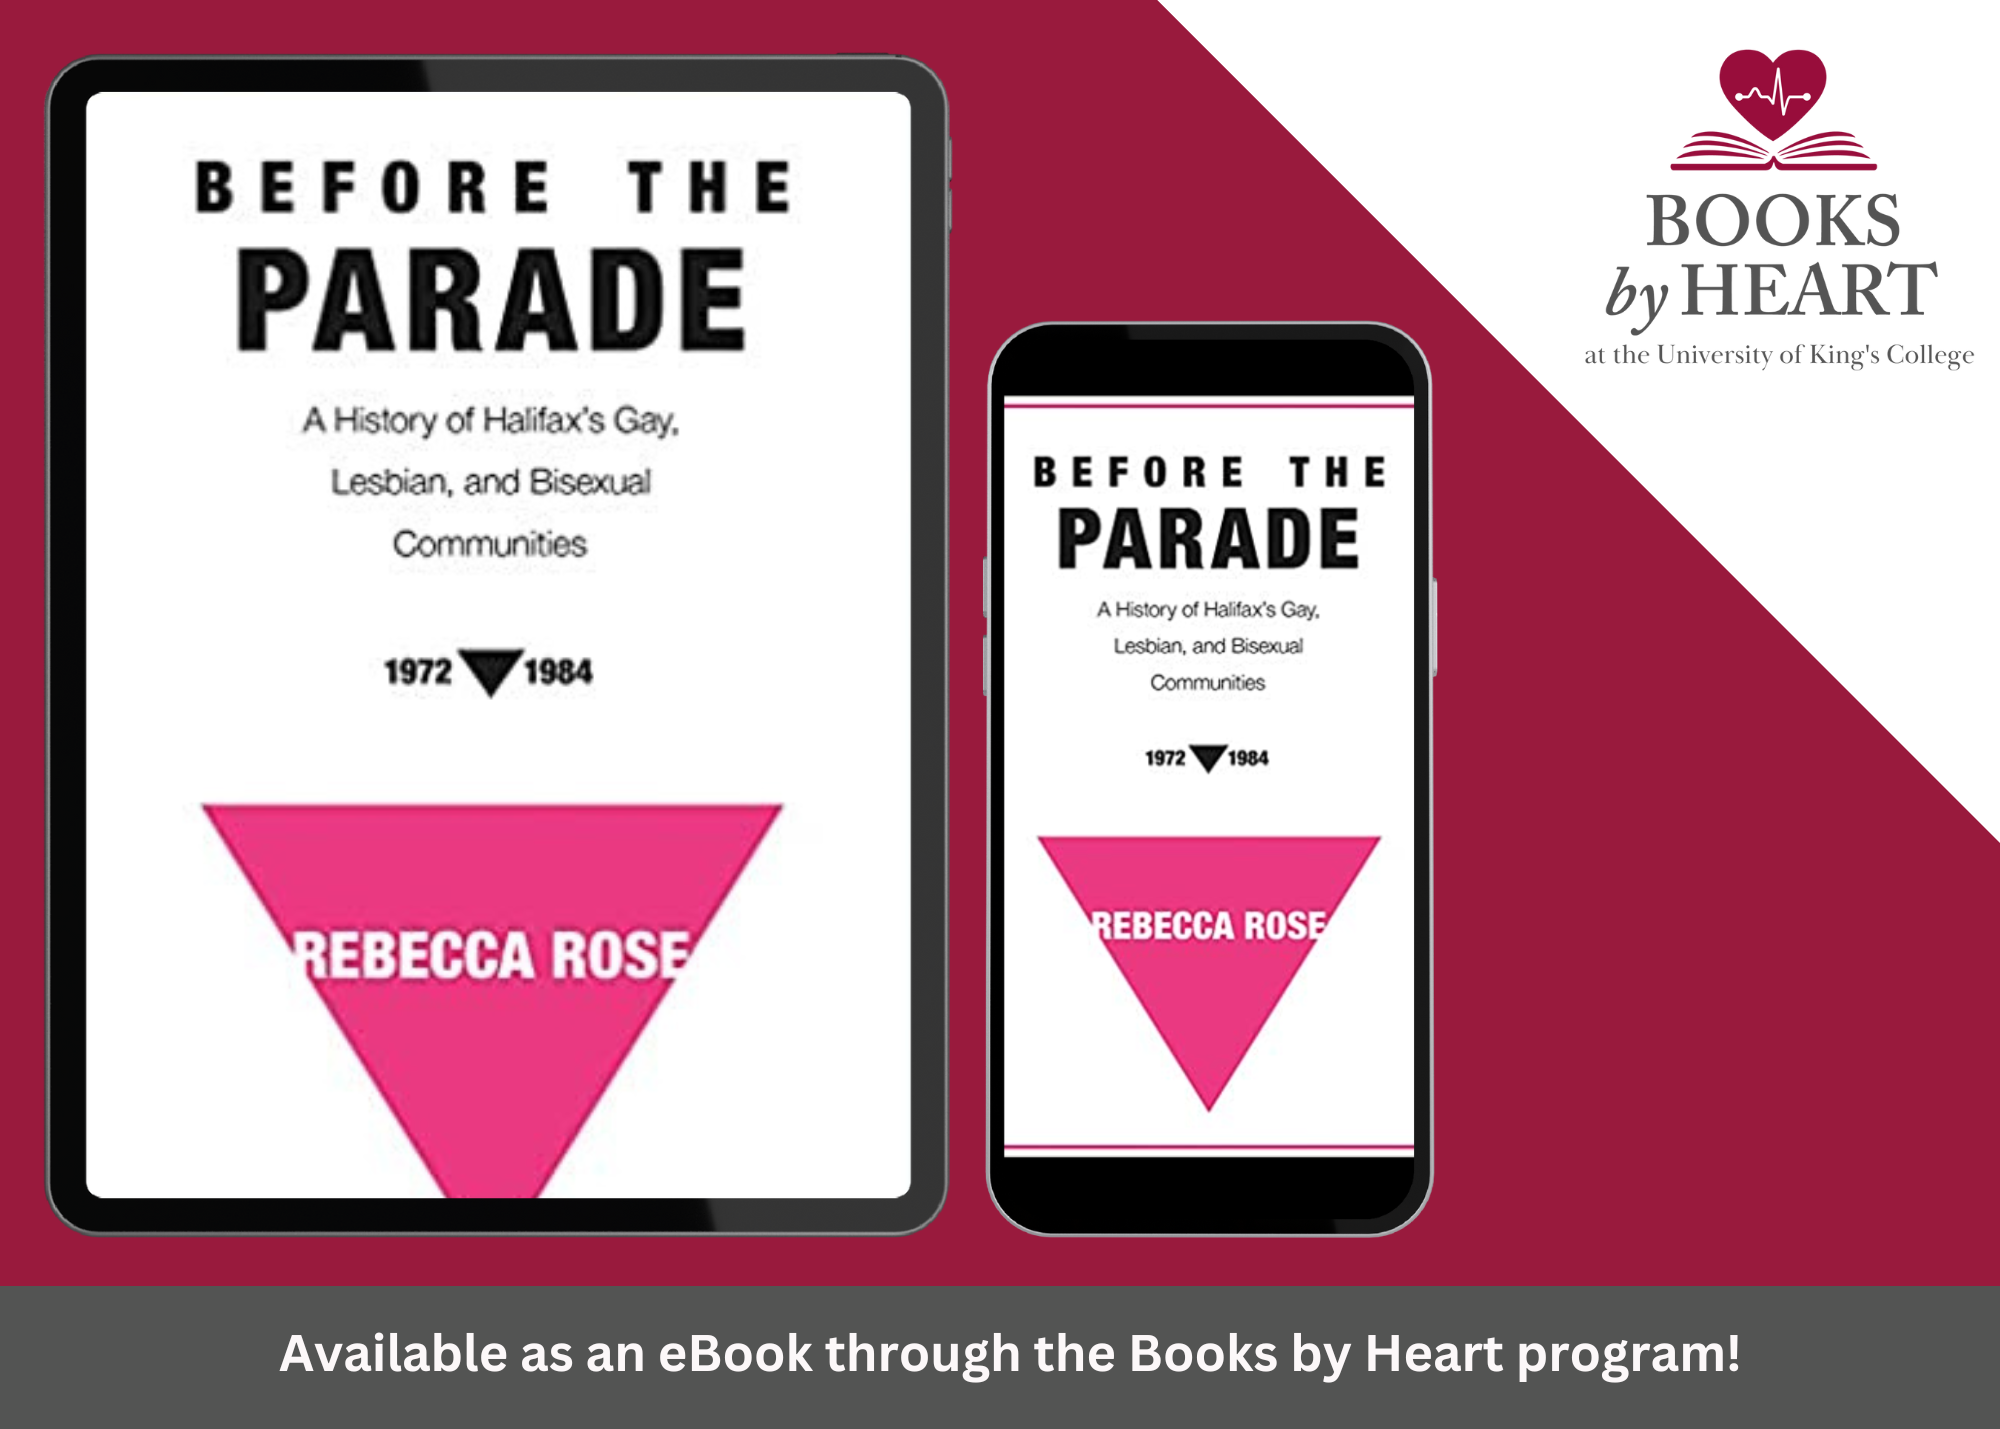 Books By Heart: Before the Parade: A History of Halifax’s Gay, Lesbian and Bisexual Communities